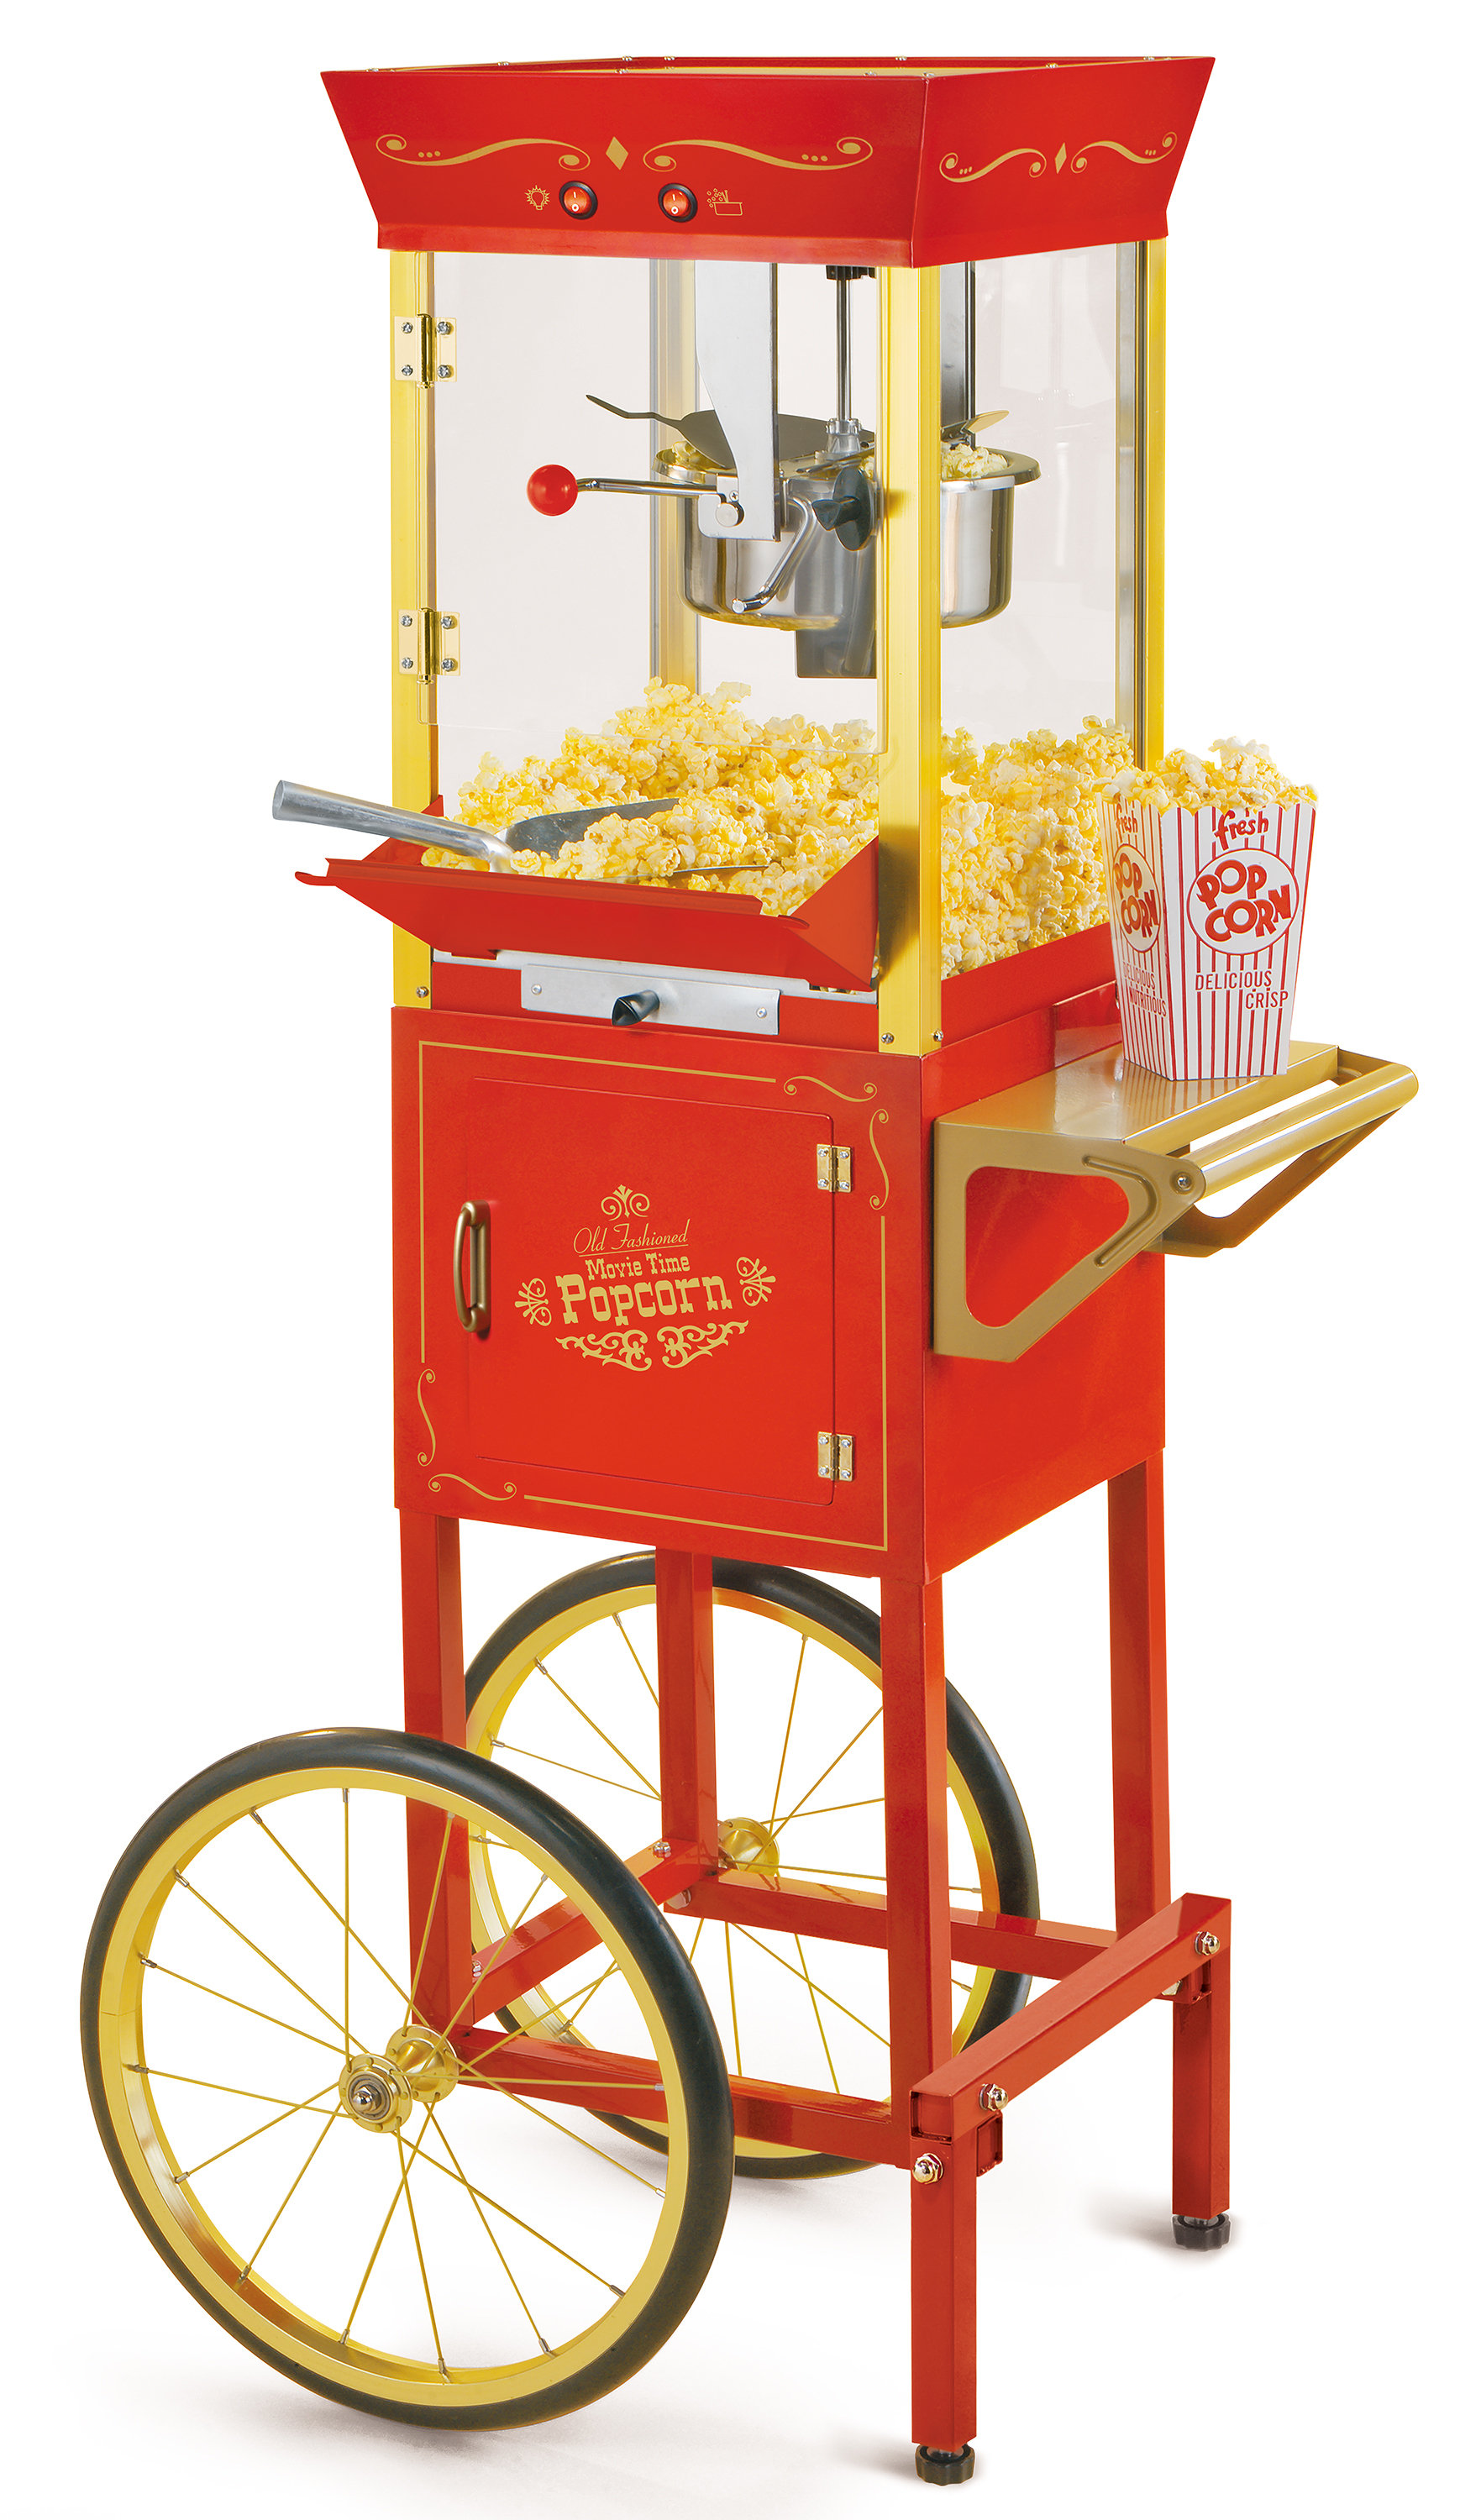 Nostalgia Electrics Nostalgia Vintage 8-Ounce Professional Popcorn and  Concession Cart, 53 Inches Tall, Makes 32 Cups of Popcorn, Kernel Measuring  Cup, Oil Measuring Spoon and Scoop, 13-Inch Wheels & Reviews